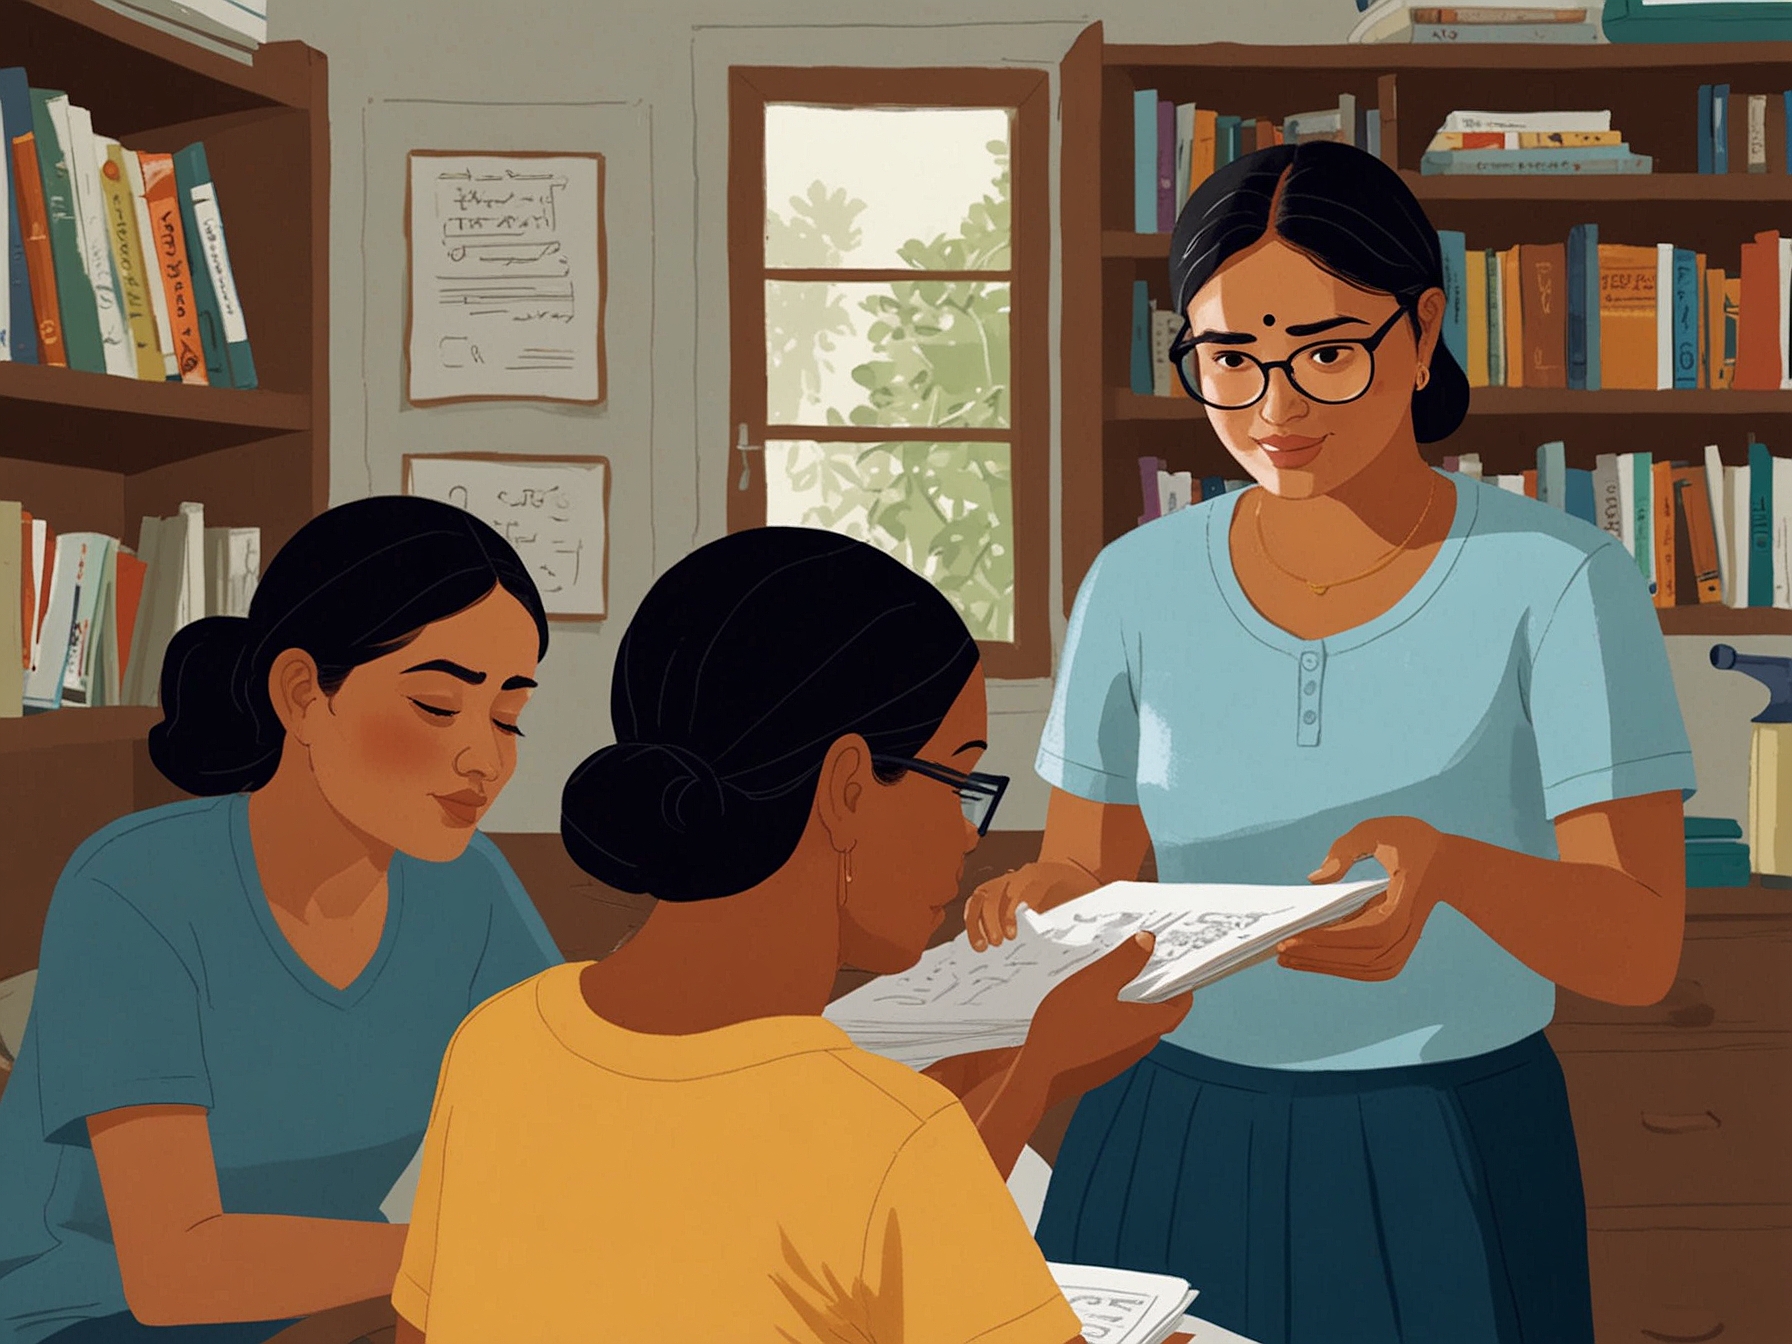 Illustration showing individuals using Google Chrome's new read-aloud feature in Bengali. Helps in diverse situations like education, multitasking, and aiding visually impaired users.